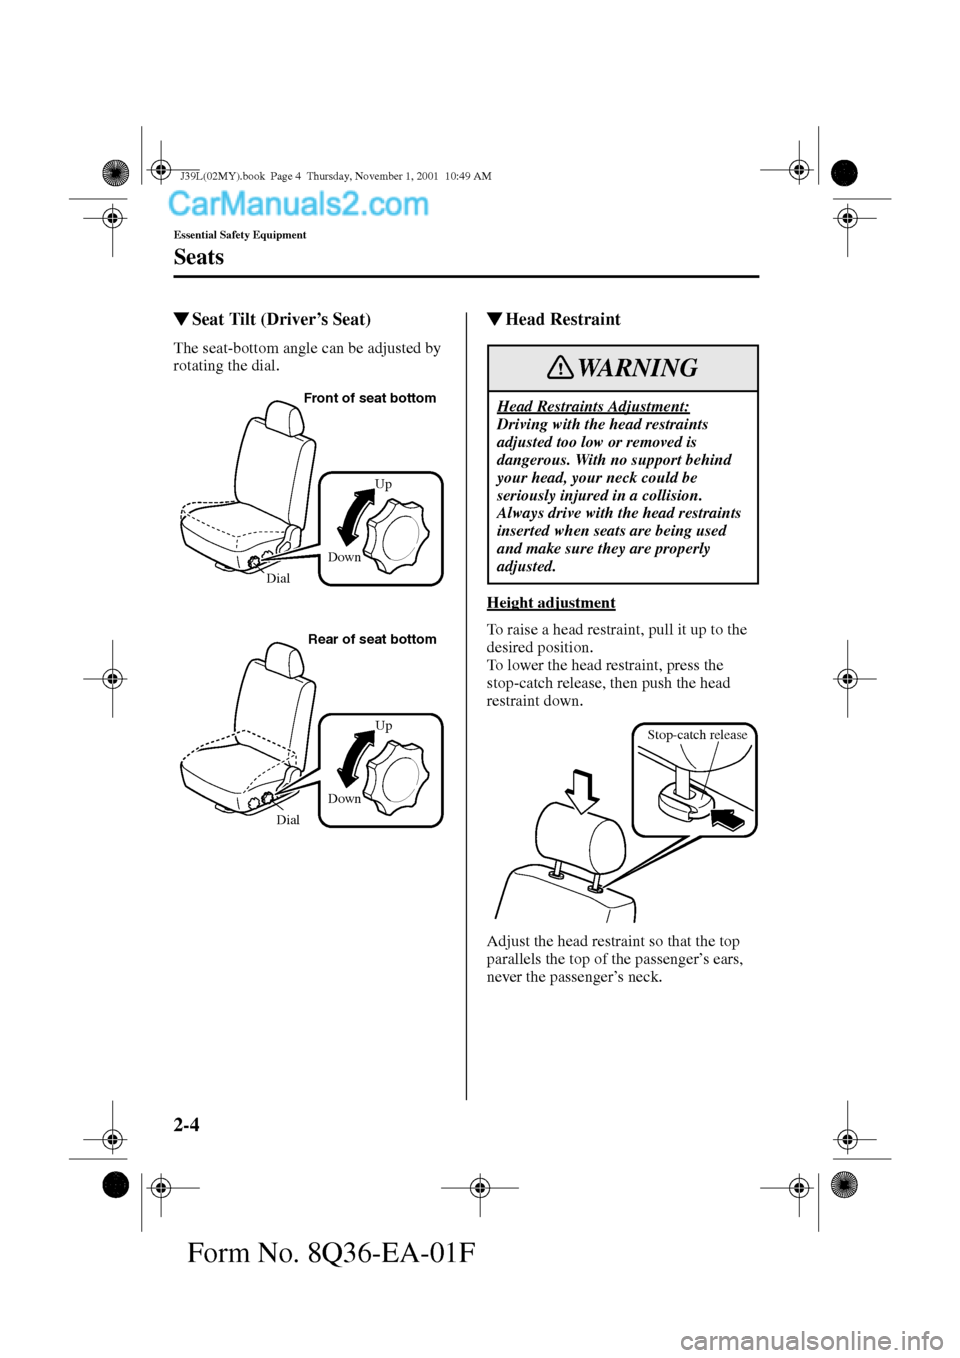 MAZDA MODEL PROTÉGÉ 2002   (in English) User Guide 2-4
Essential Safety Equipment
Seats
Form No. 8Q36-EA-01F
Seat Tilt (Driver’s Seat)
The seat-bottom angle can be adjusted by 
rotating the dial.
Head Restraint
Height adjustment
To raise a head re